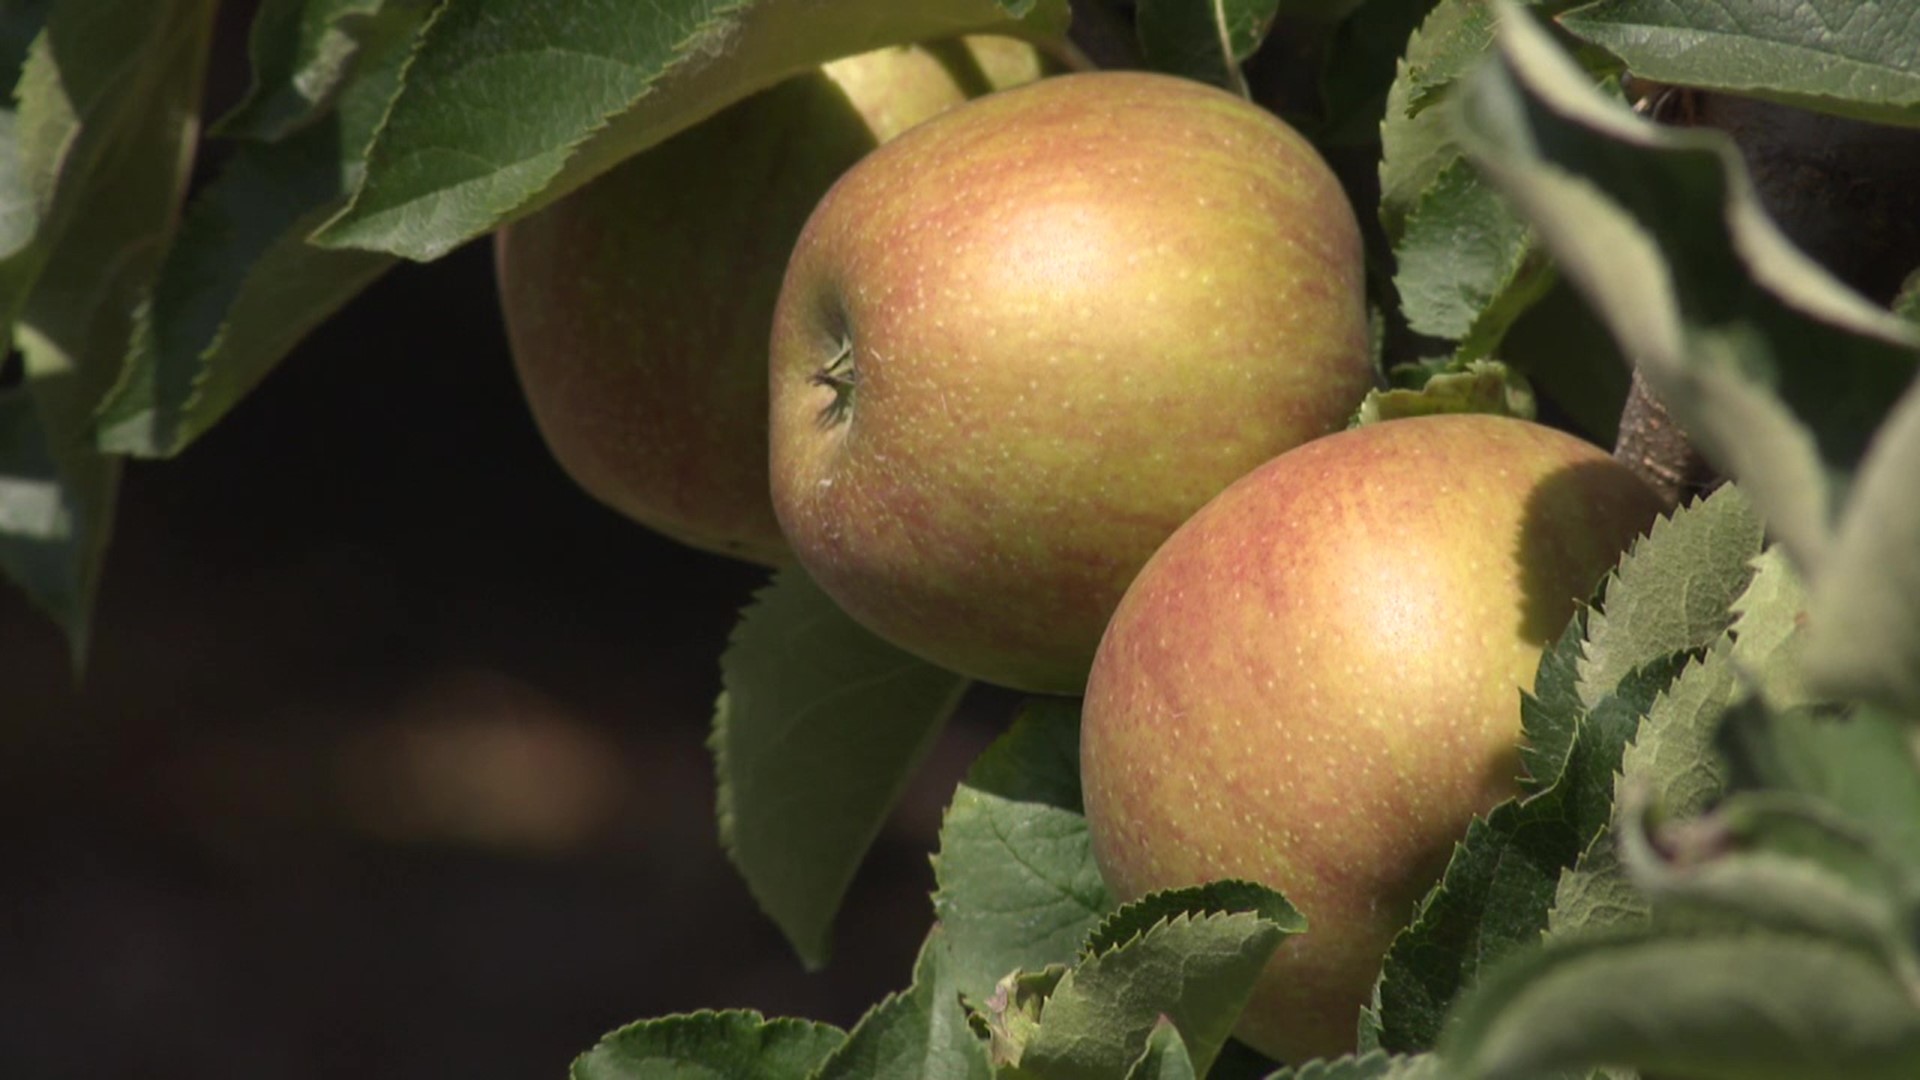 Farmers say while the weather hasn't been kind,  this apple season will still be great.